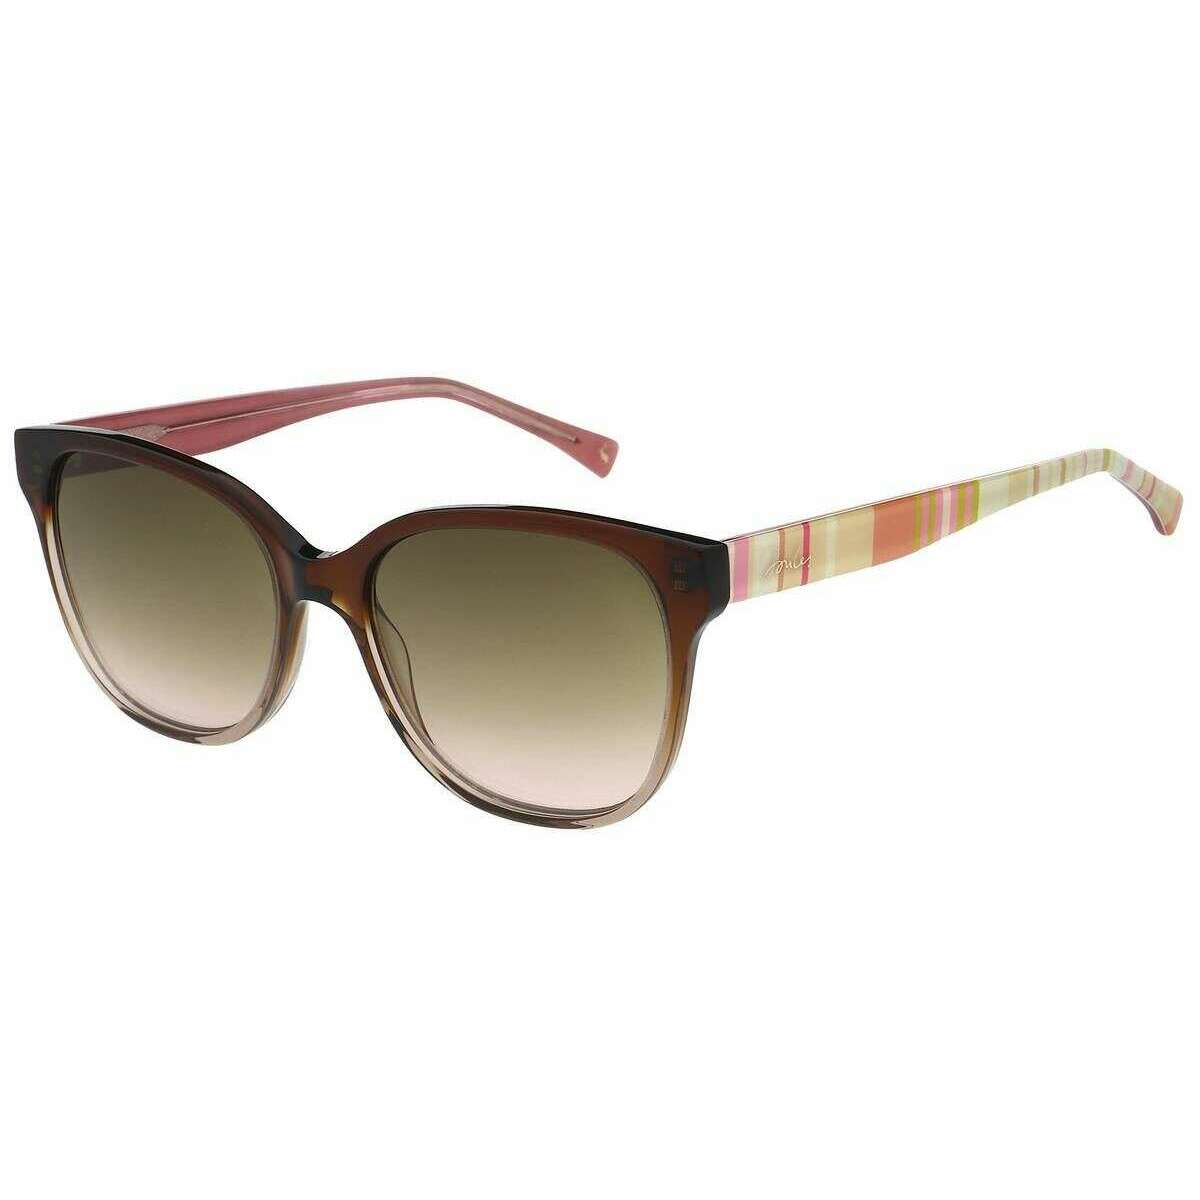 Joules Ivy Sunglasses - Brown Grad/Pink